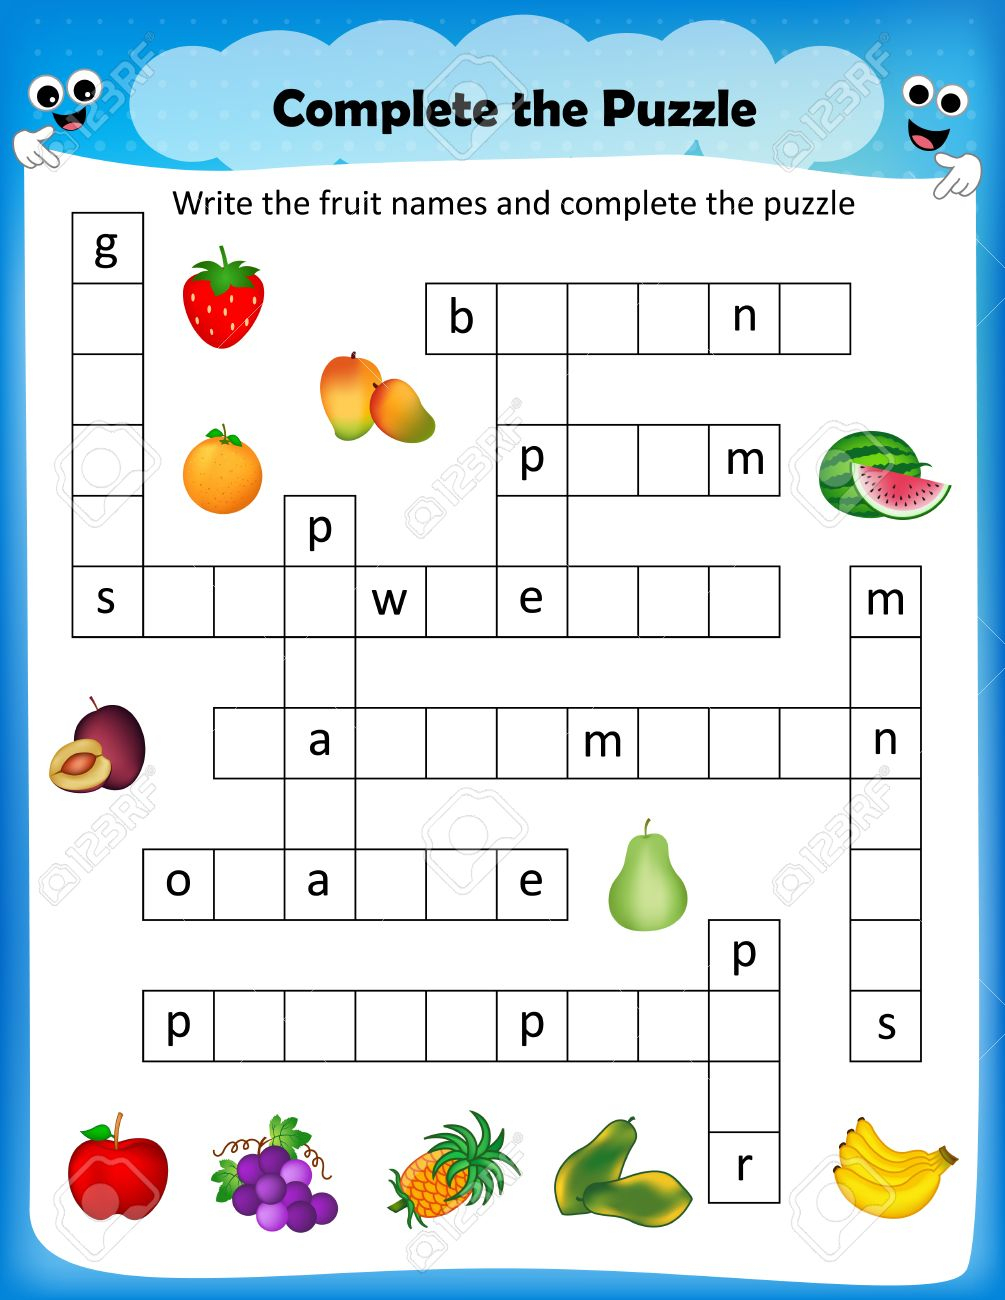 Worksheet - Complete The Crossword Puzzle Fruits Worksheet For - Worksheet On Puzzle